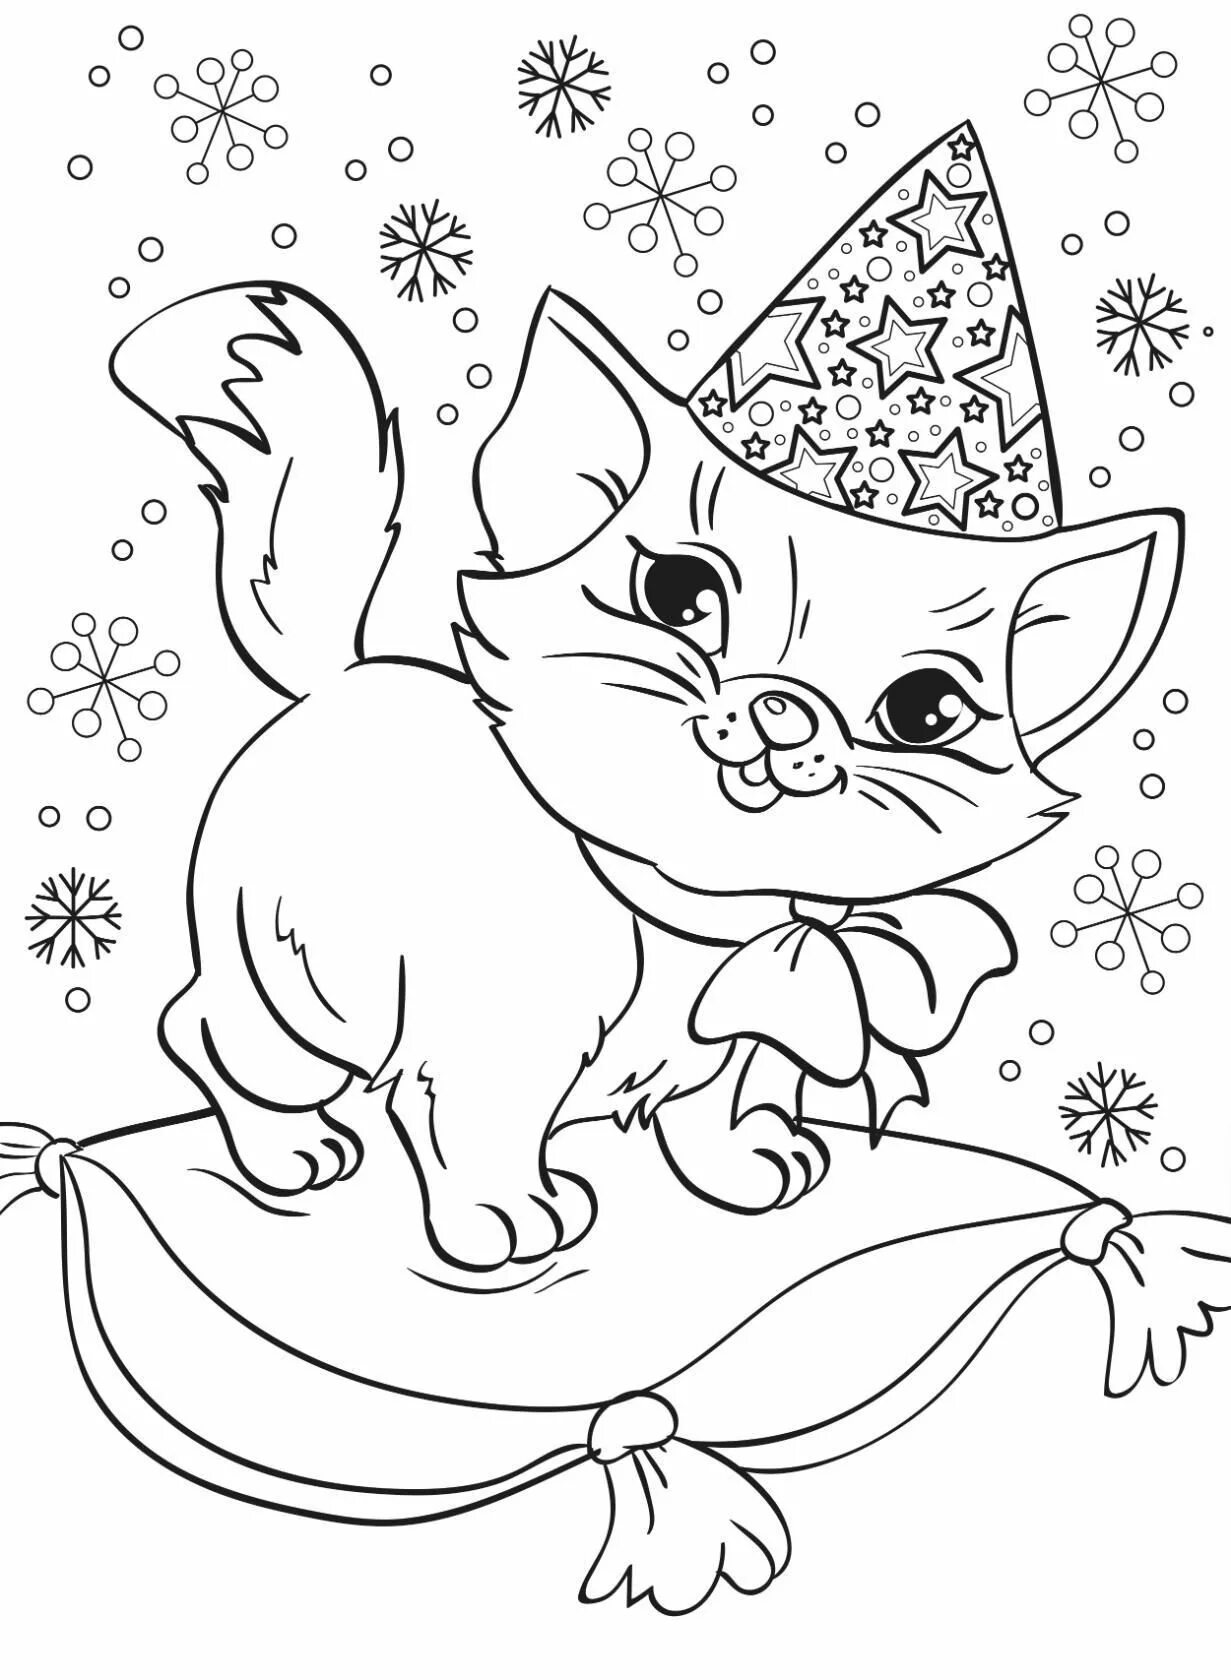 Luxurious Christmas cat coloring